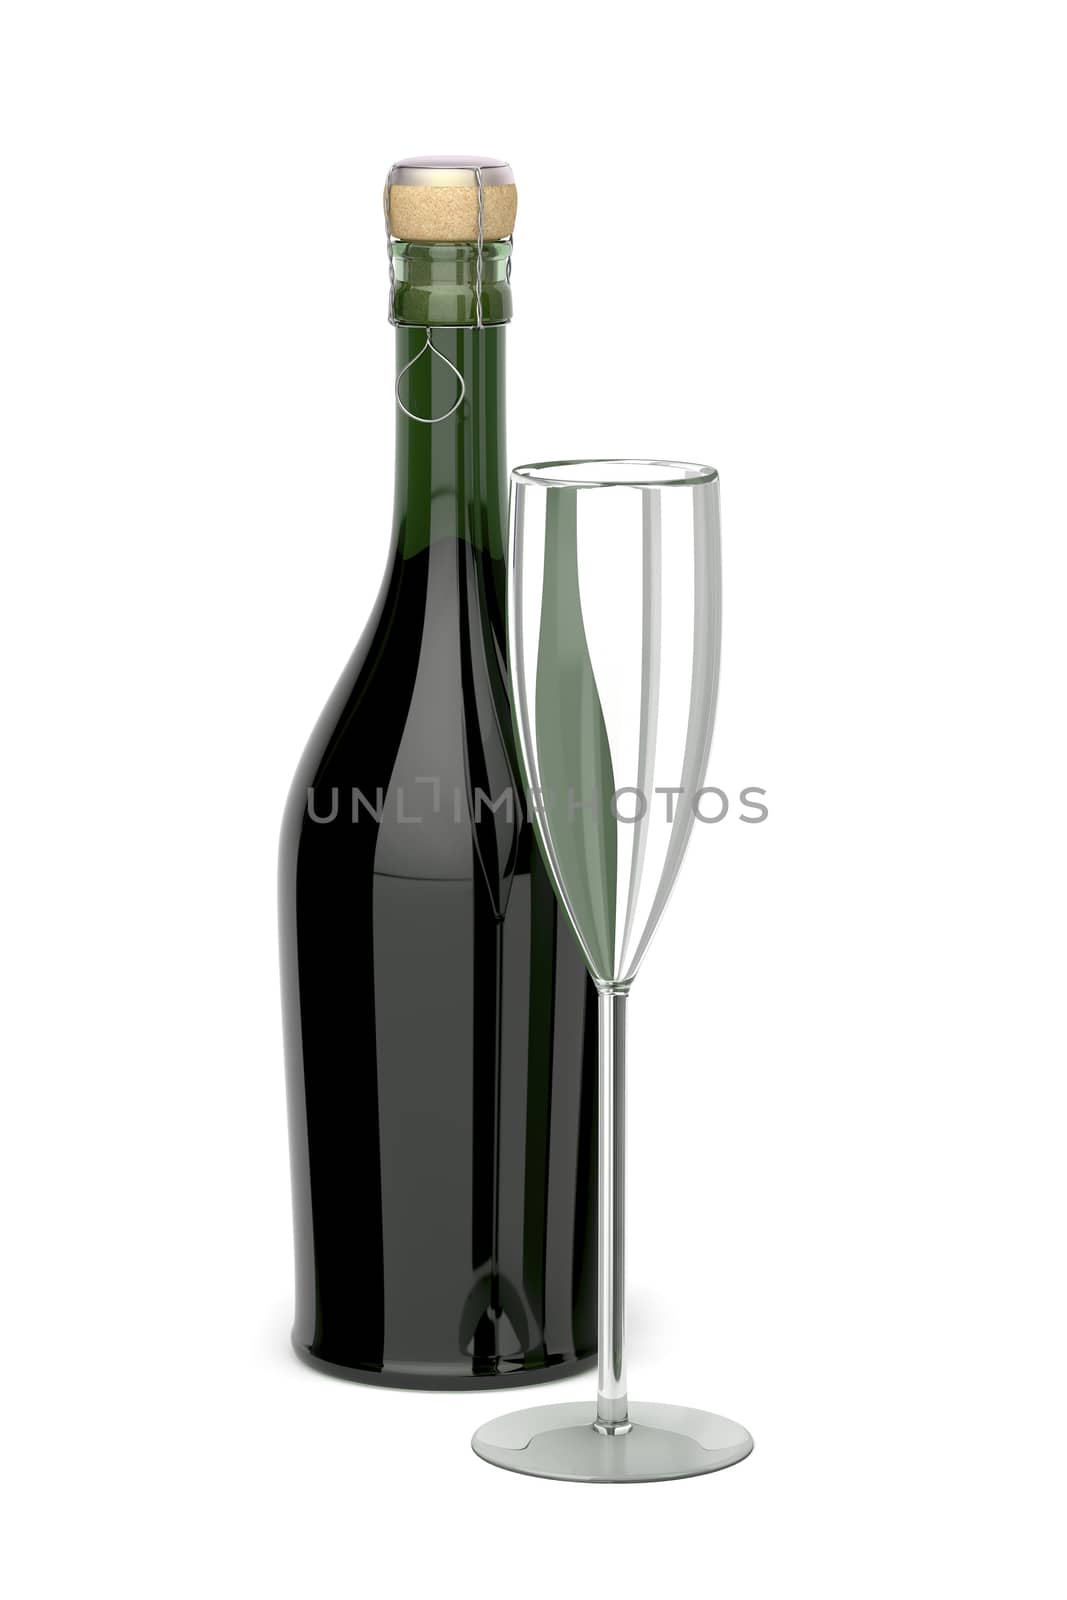 Champagne flute and bottle by magraphics